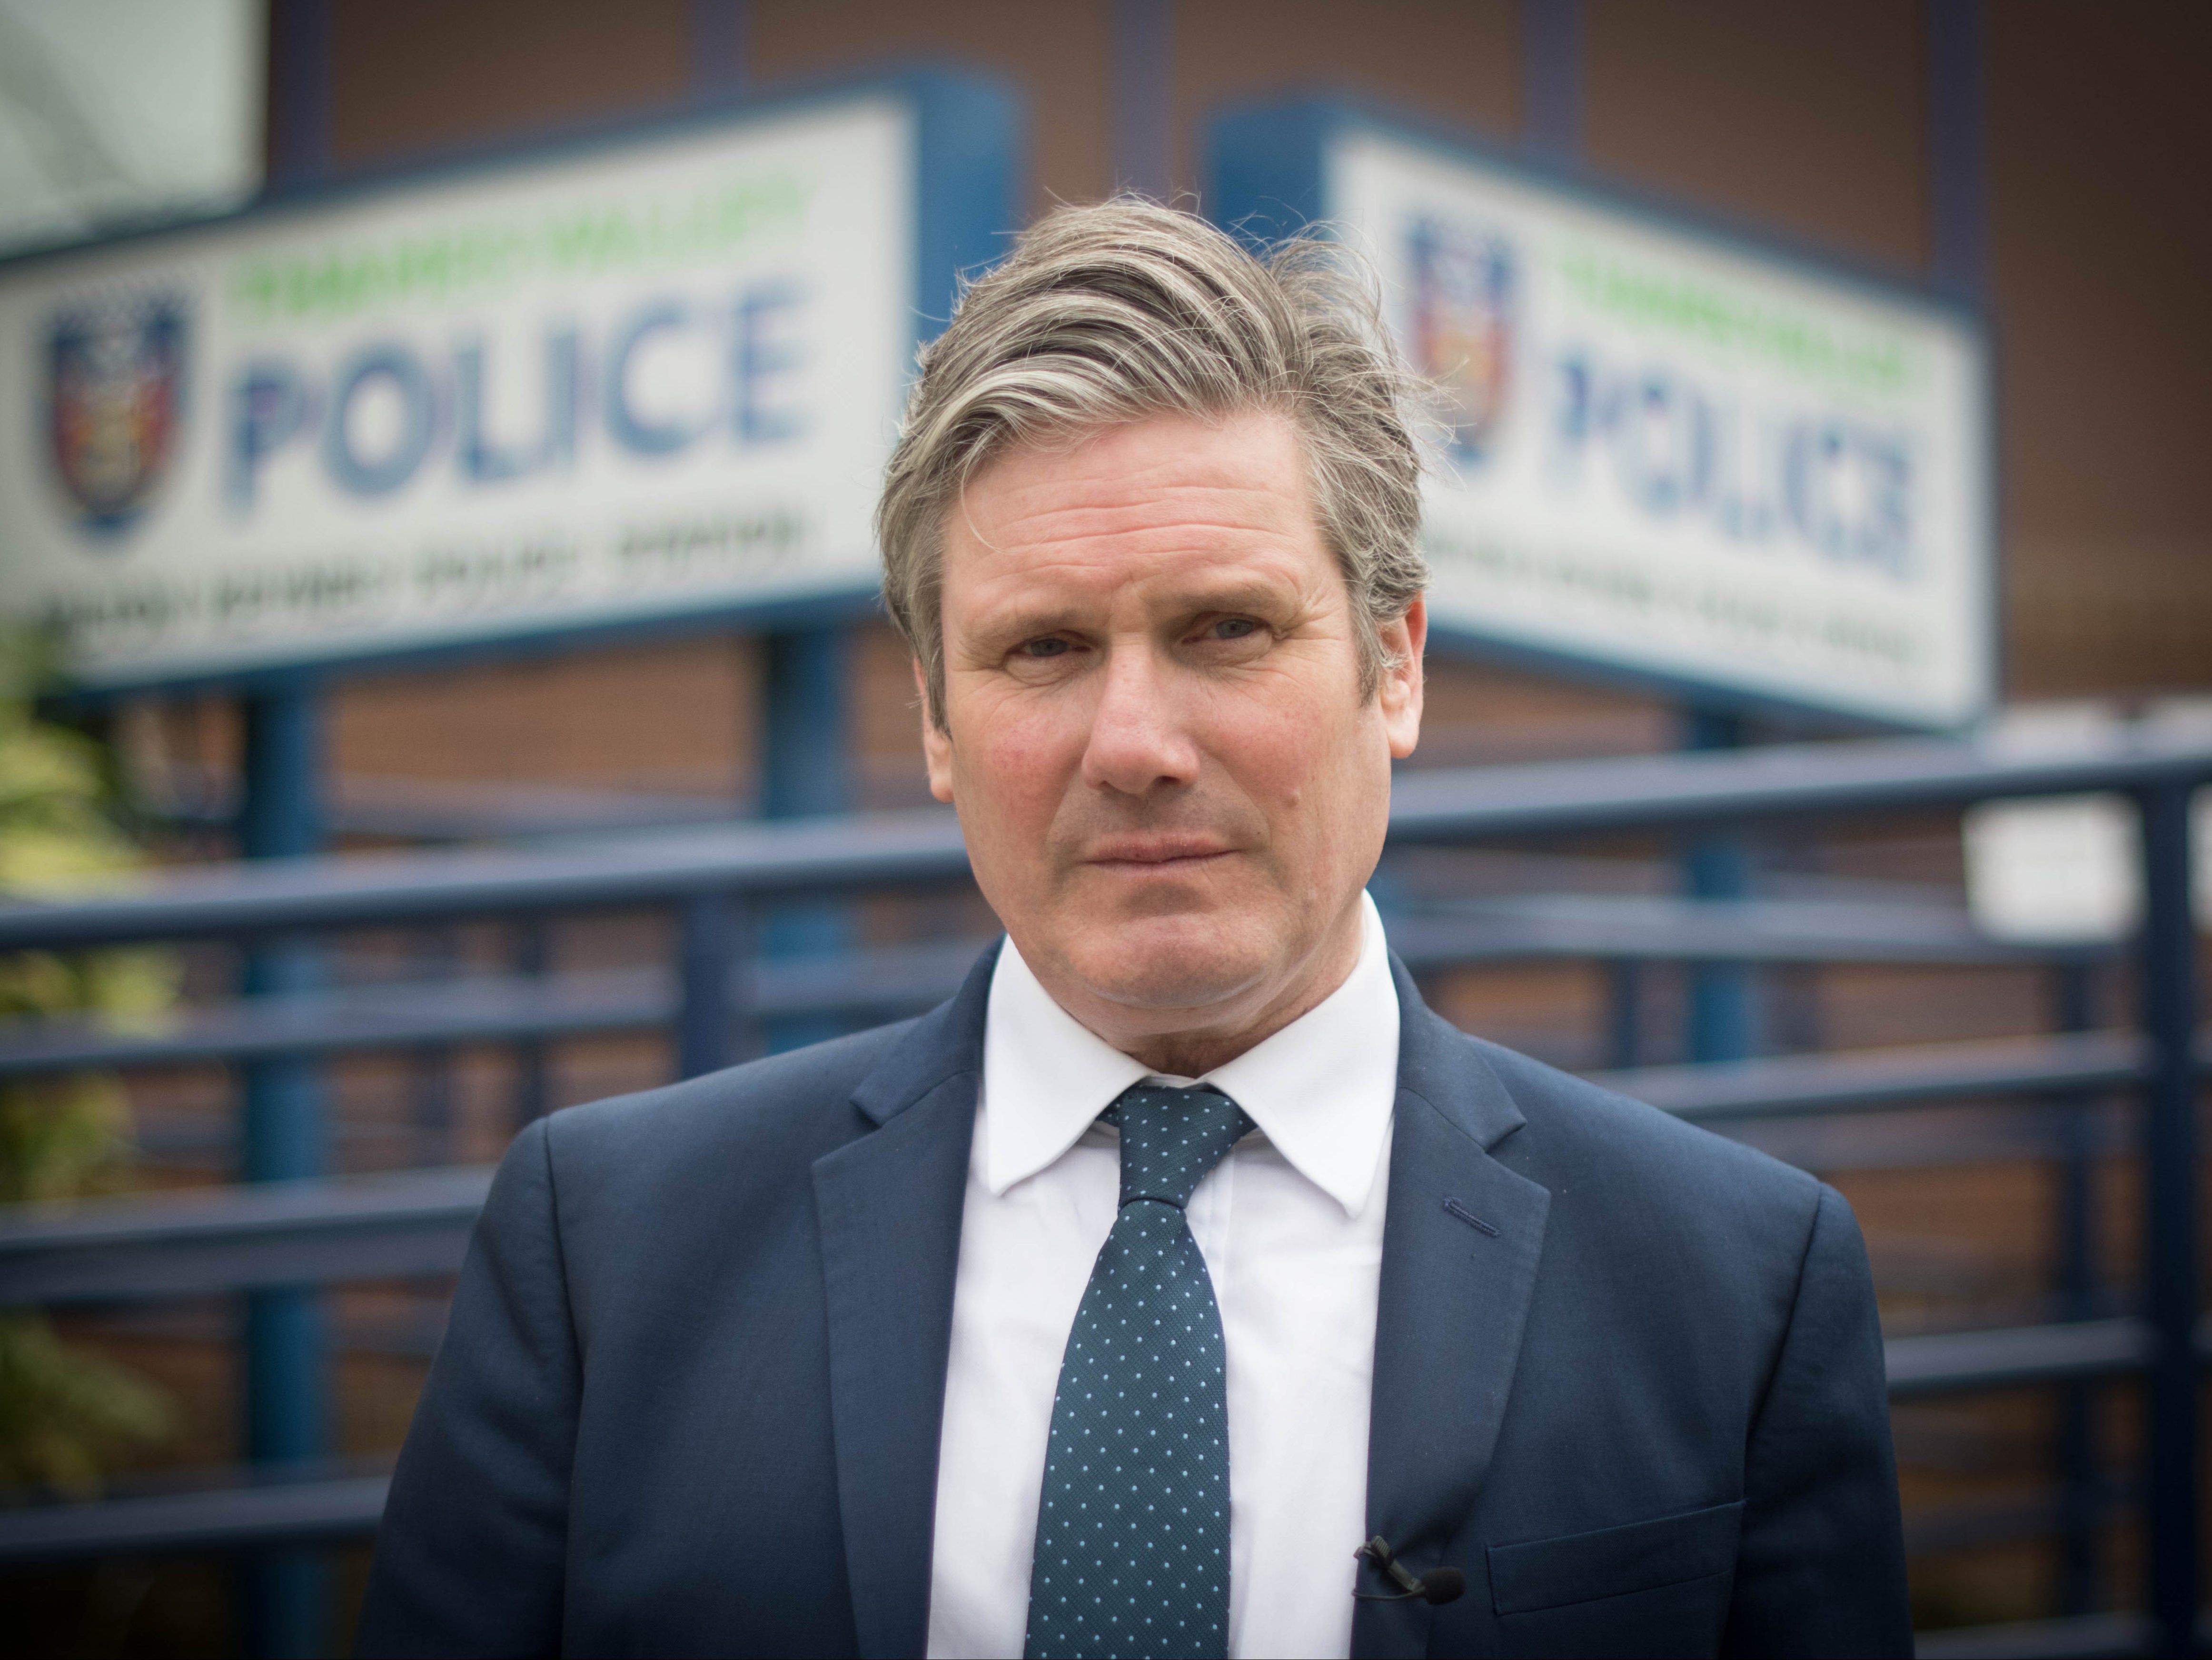 Labour leader Sir Keir Starmer visits Milton Keynes police station on Monday, while on his party’s campaign ahead of the May elections